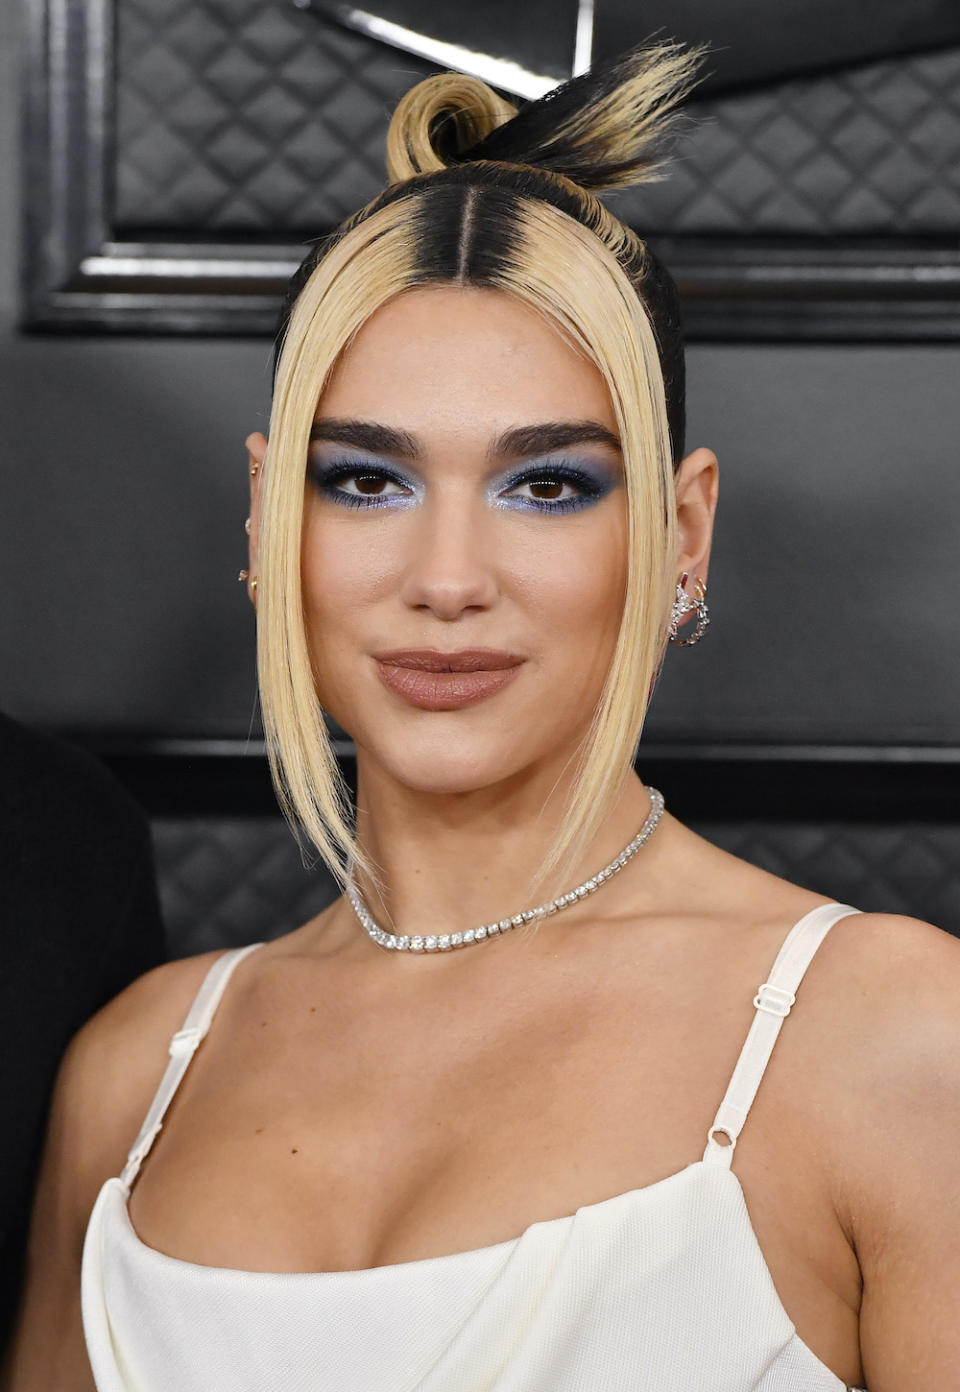 <p> If there's one make-up item that really characterises the '70s, it's blue eyeshadow - a staple look of the decade. Here, singer Dua Lipa lets the shade do the talking, keeping the rest of her make-up neutral. </p>